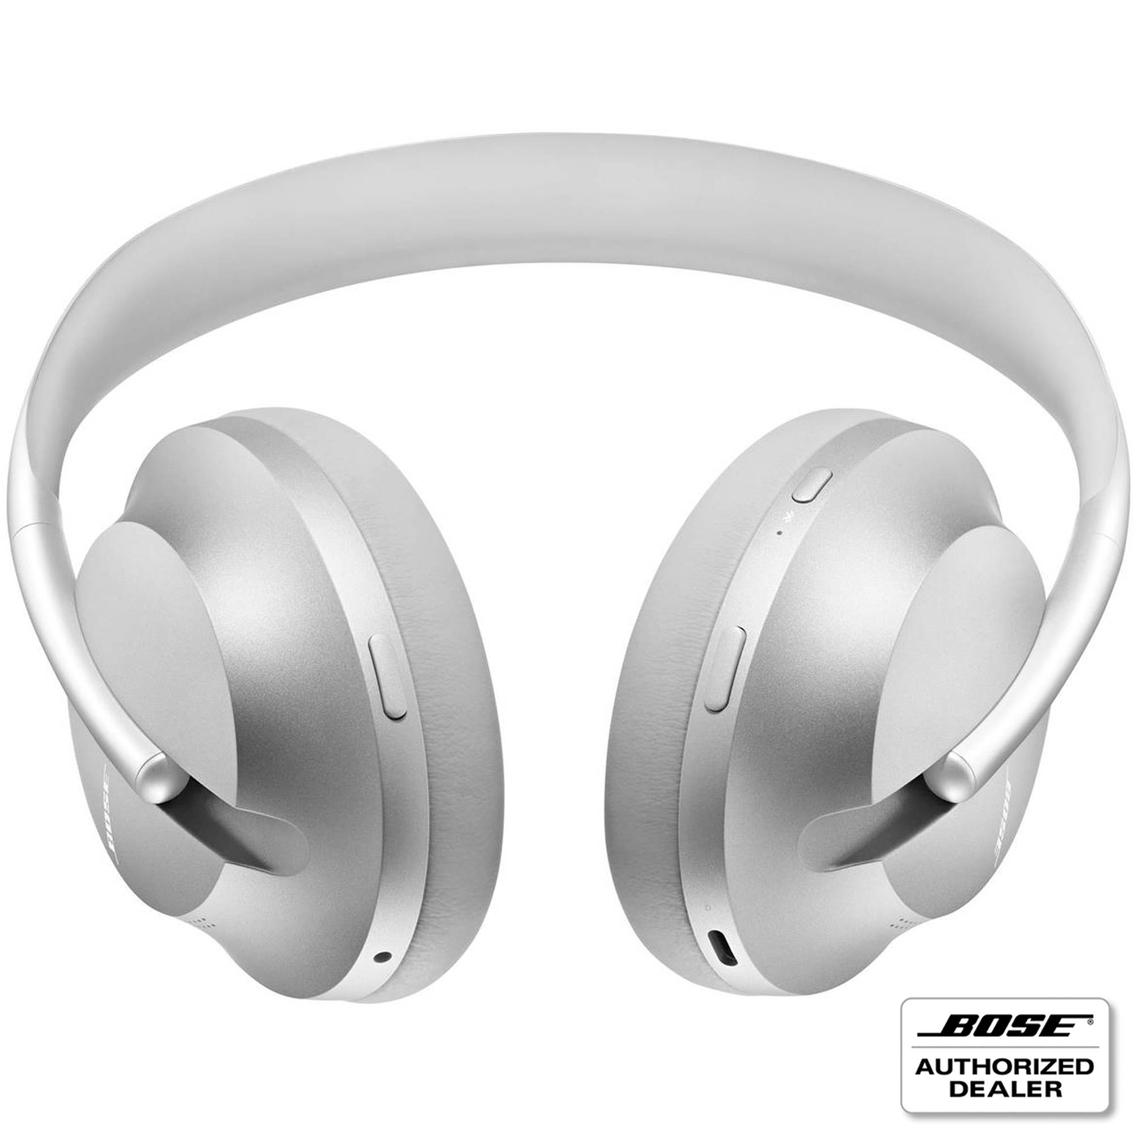 Bose Wireless Noise Cancelling Headphones 700 - Image 4 of 9